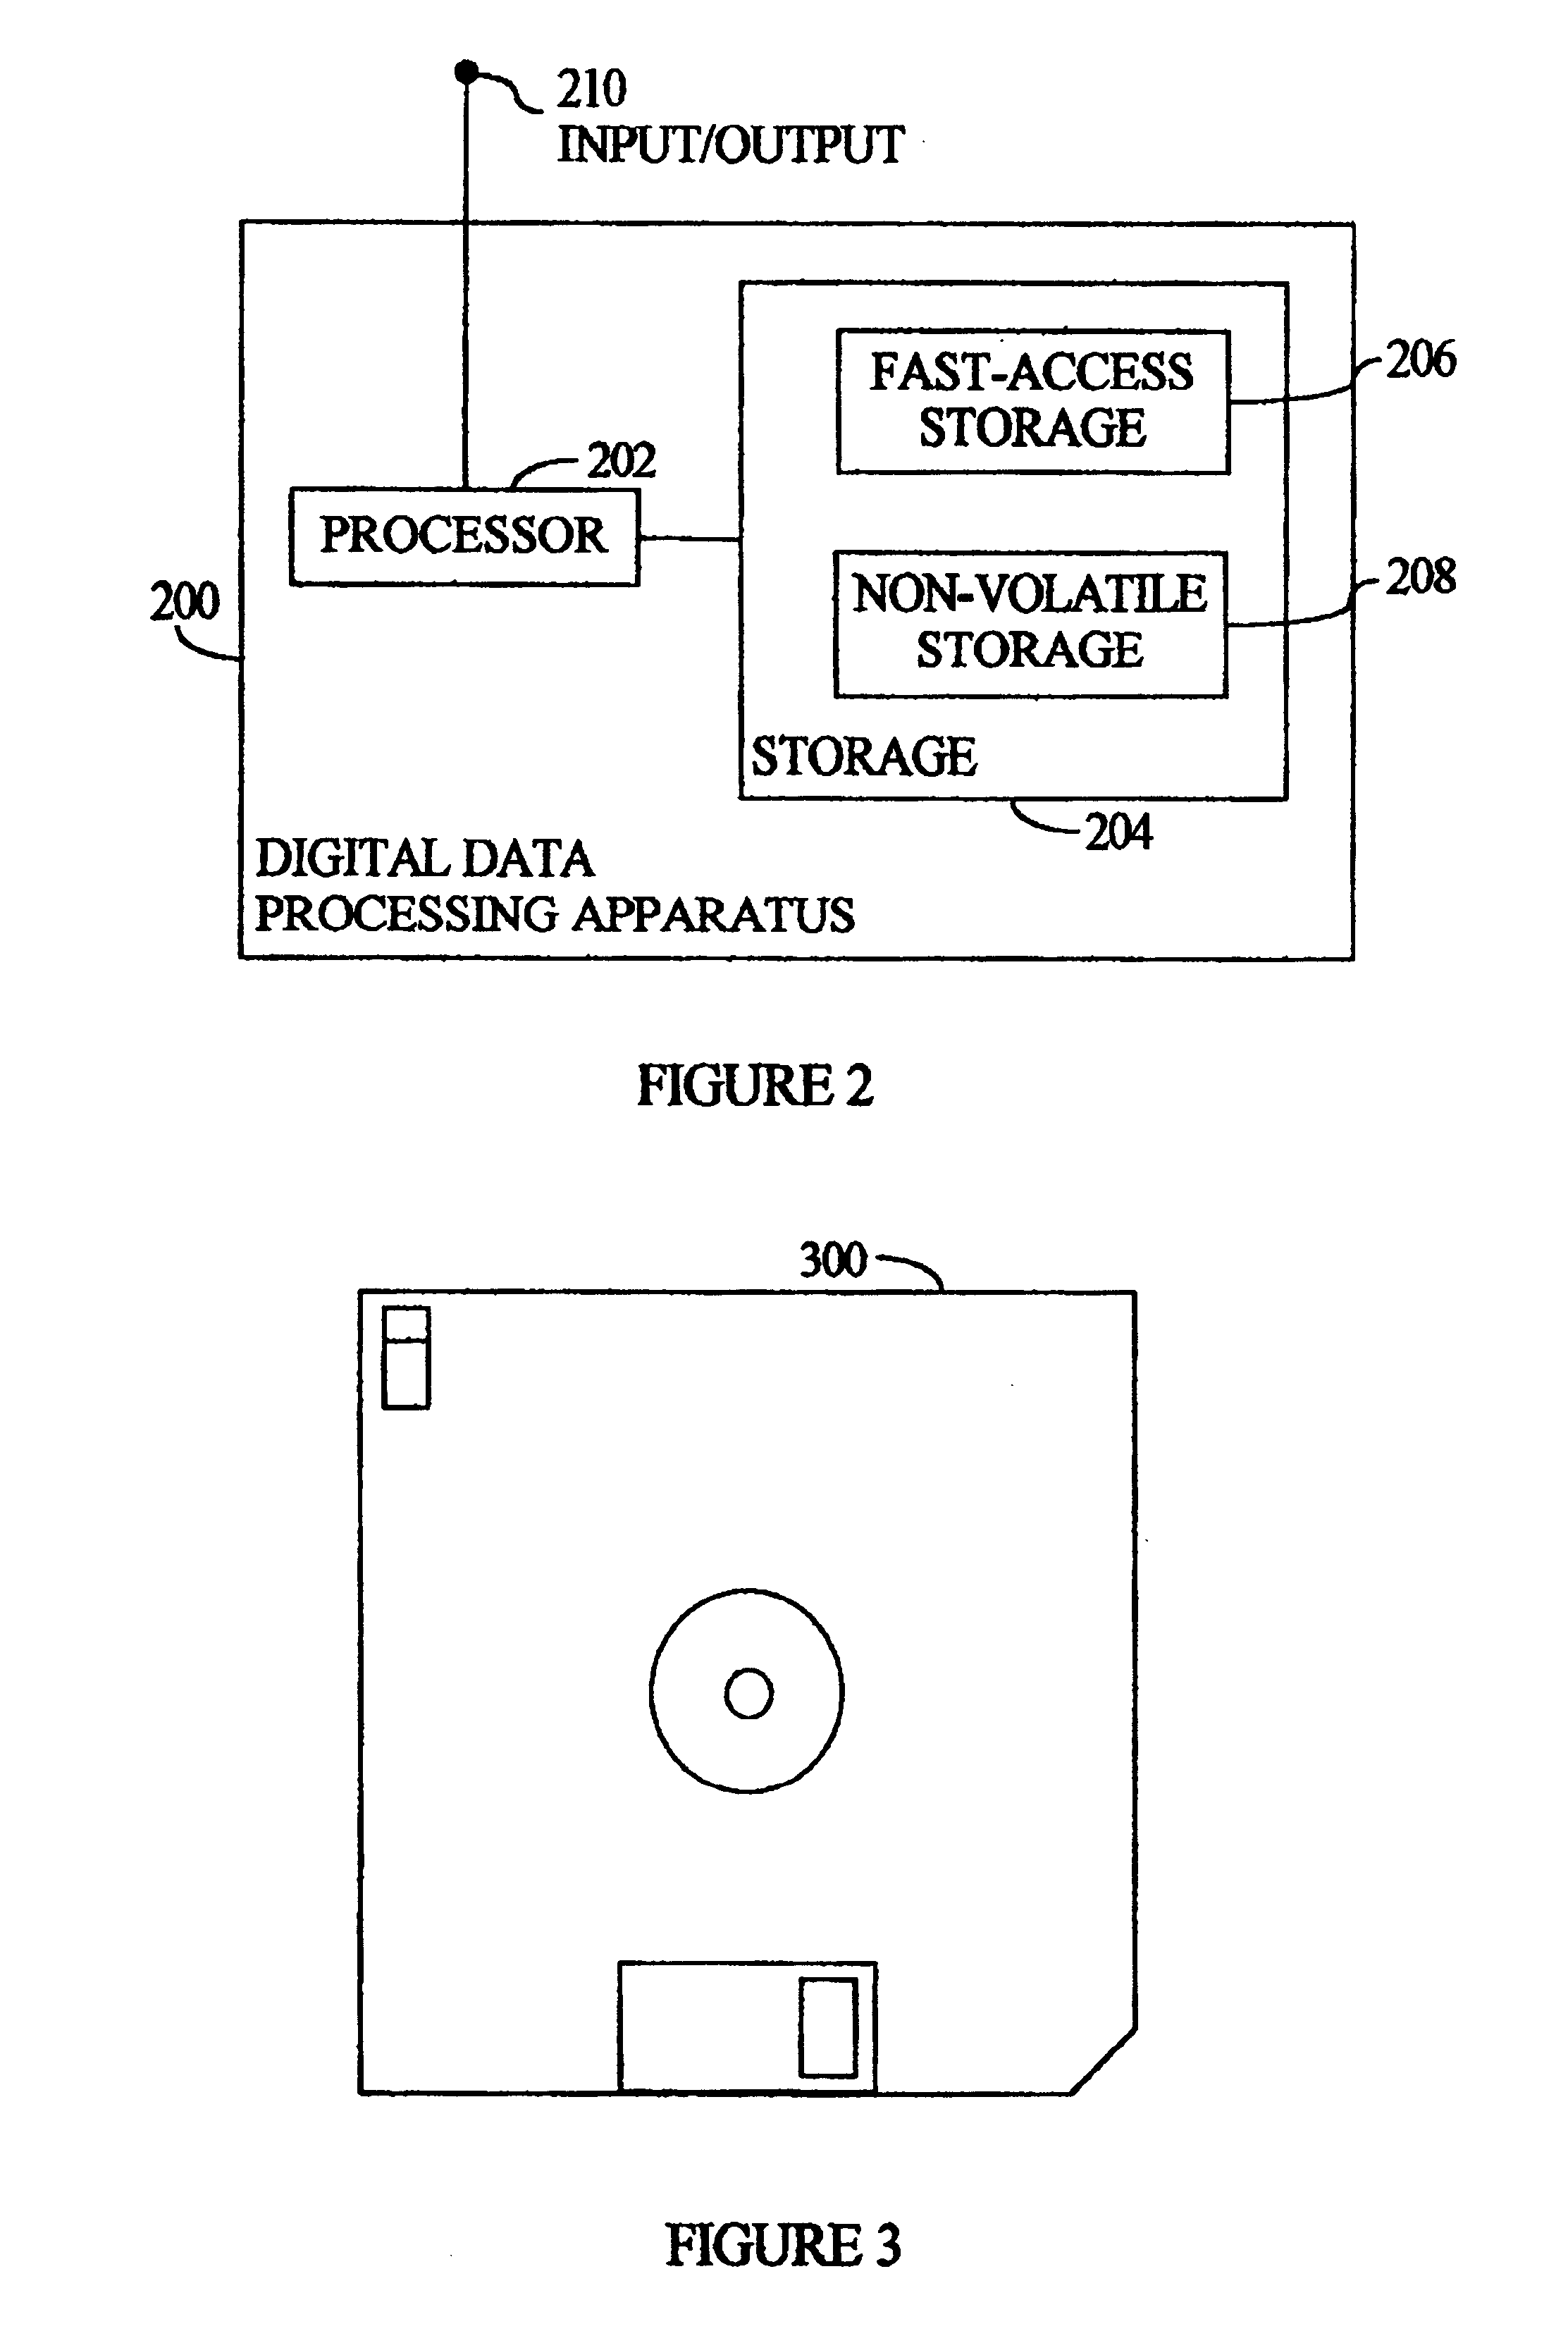 Method and apparatus for immediate data backup by duplicating pointers and freezing pointer/data counterparts